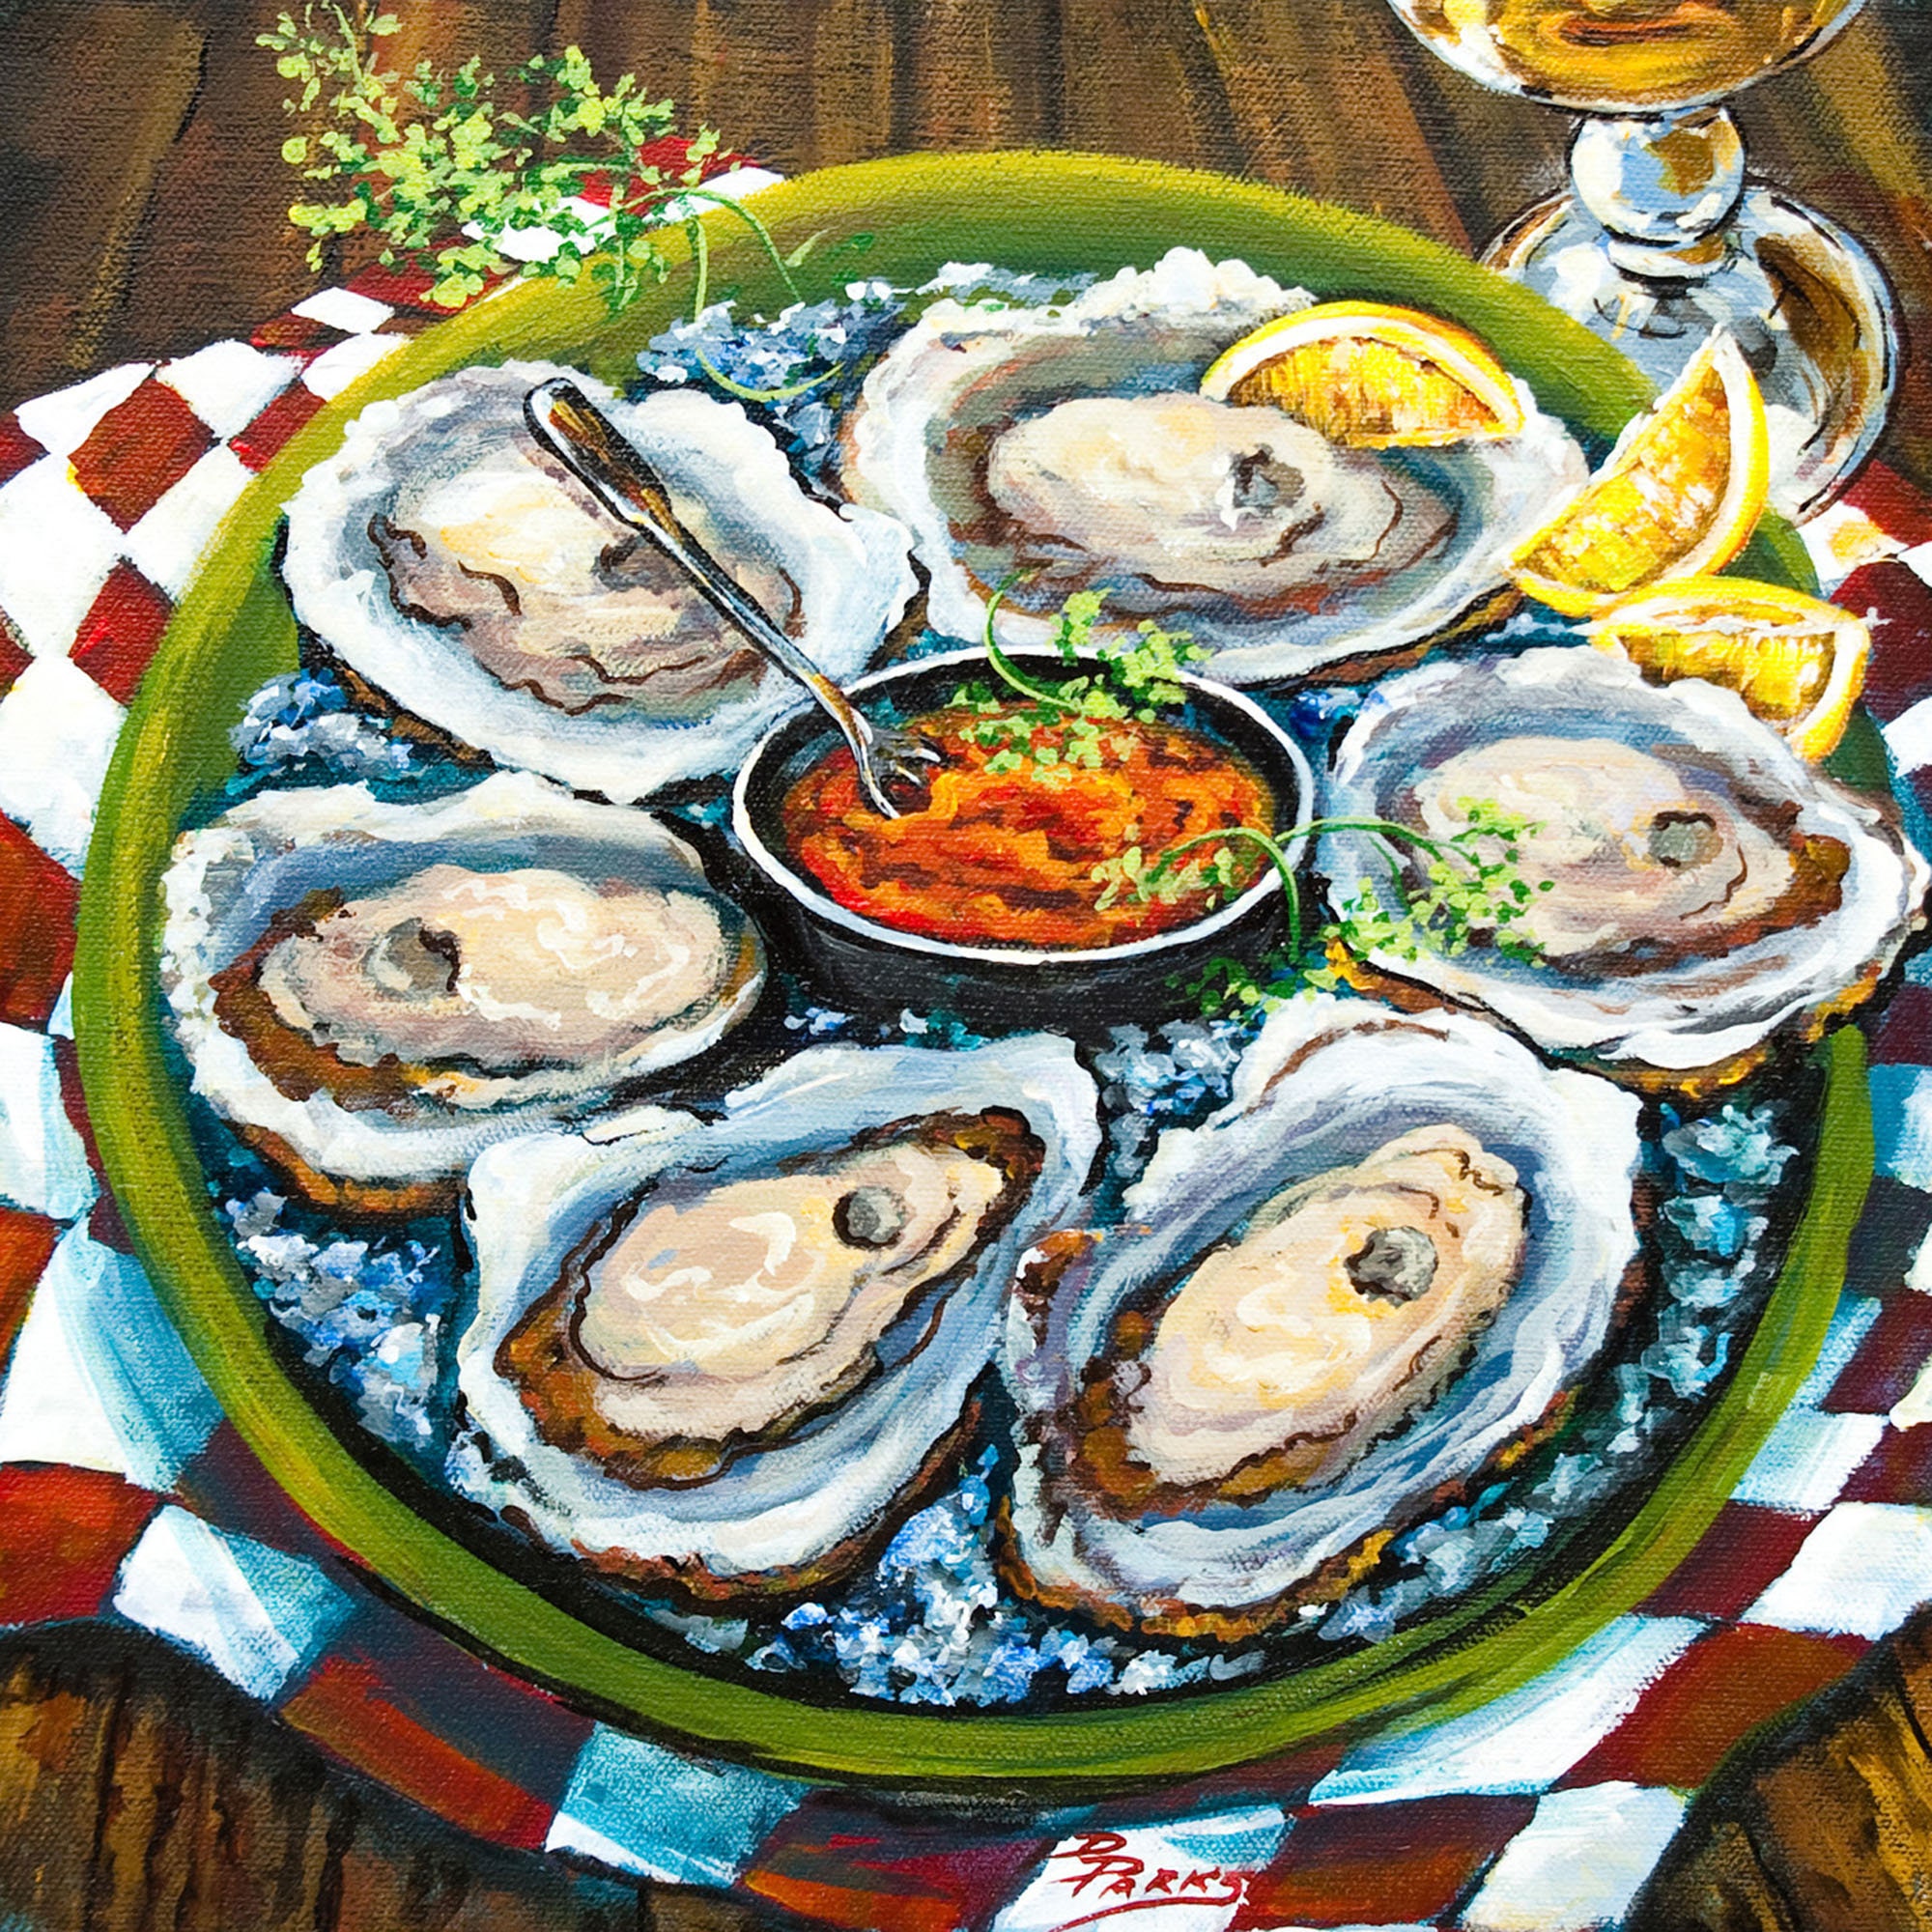 Oyster Painting, Louisiana Art, Raw Oysters, New Orleans Seafood Painting, New Food, Painting - "Half Dozen Oysters'